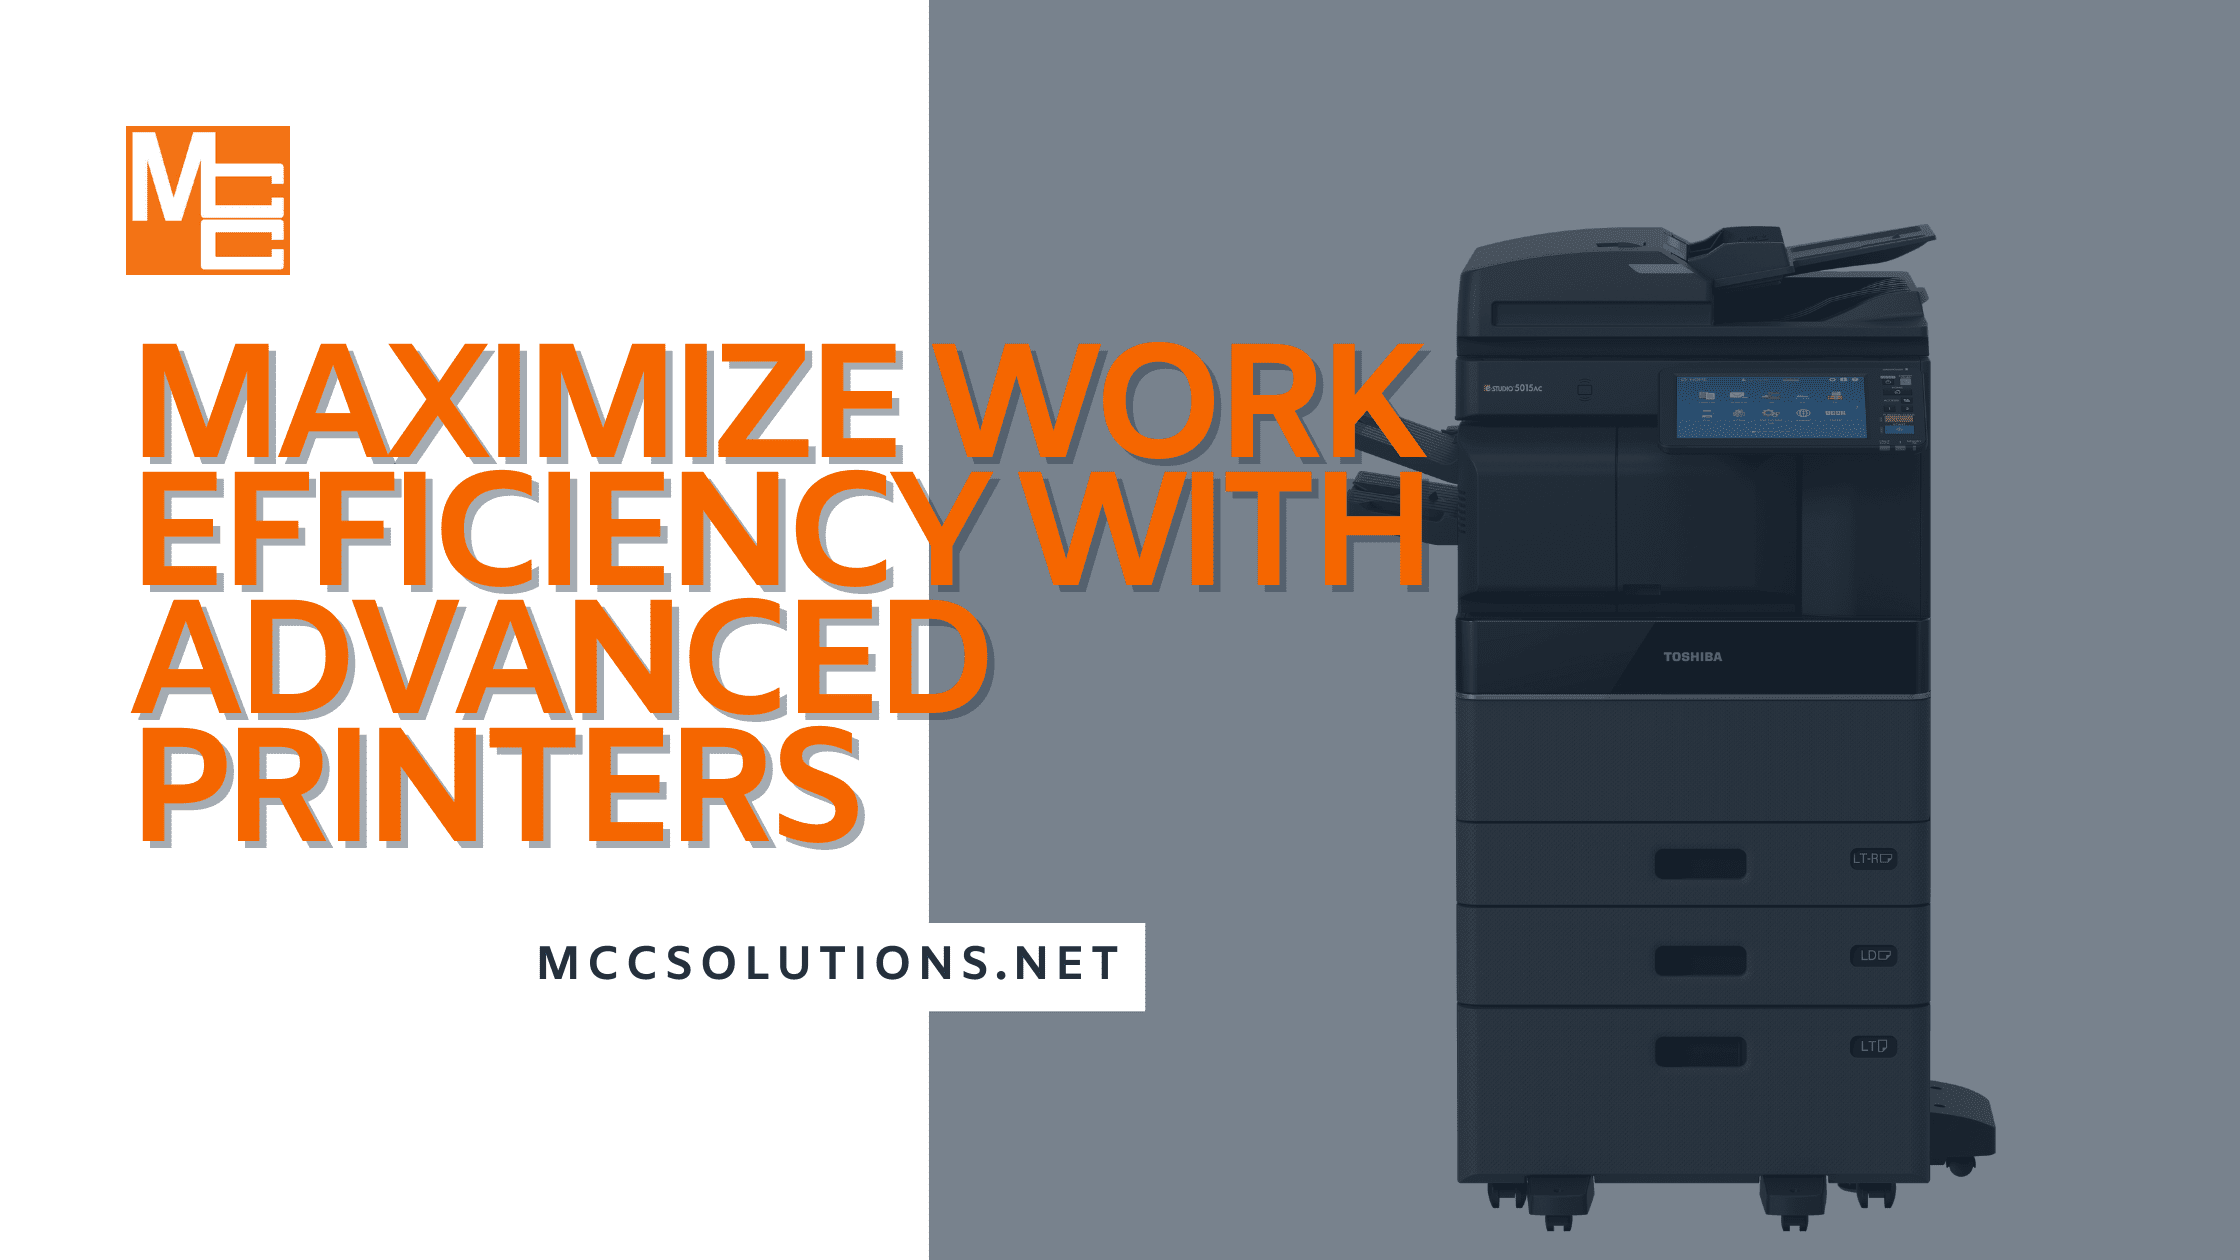 Maximize Work Efficiency with Advanced Printers